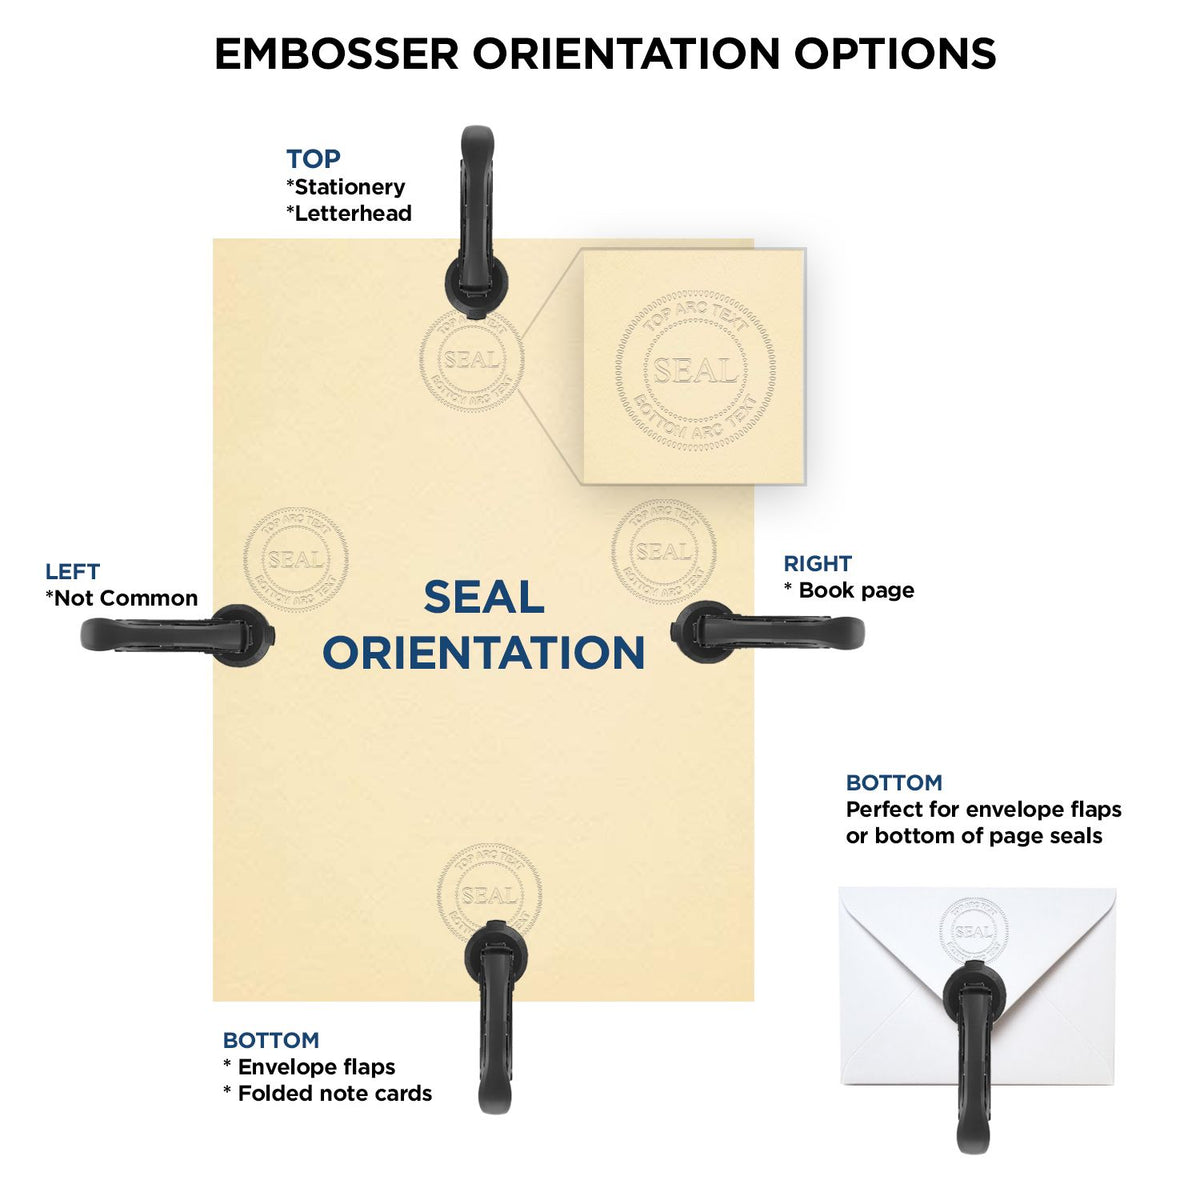 An infographic for the State of Tennessee Architectural Seal Embosser showing embosser orientation, this is showing examples of a top, bottom, right and left insert.